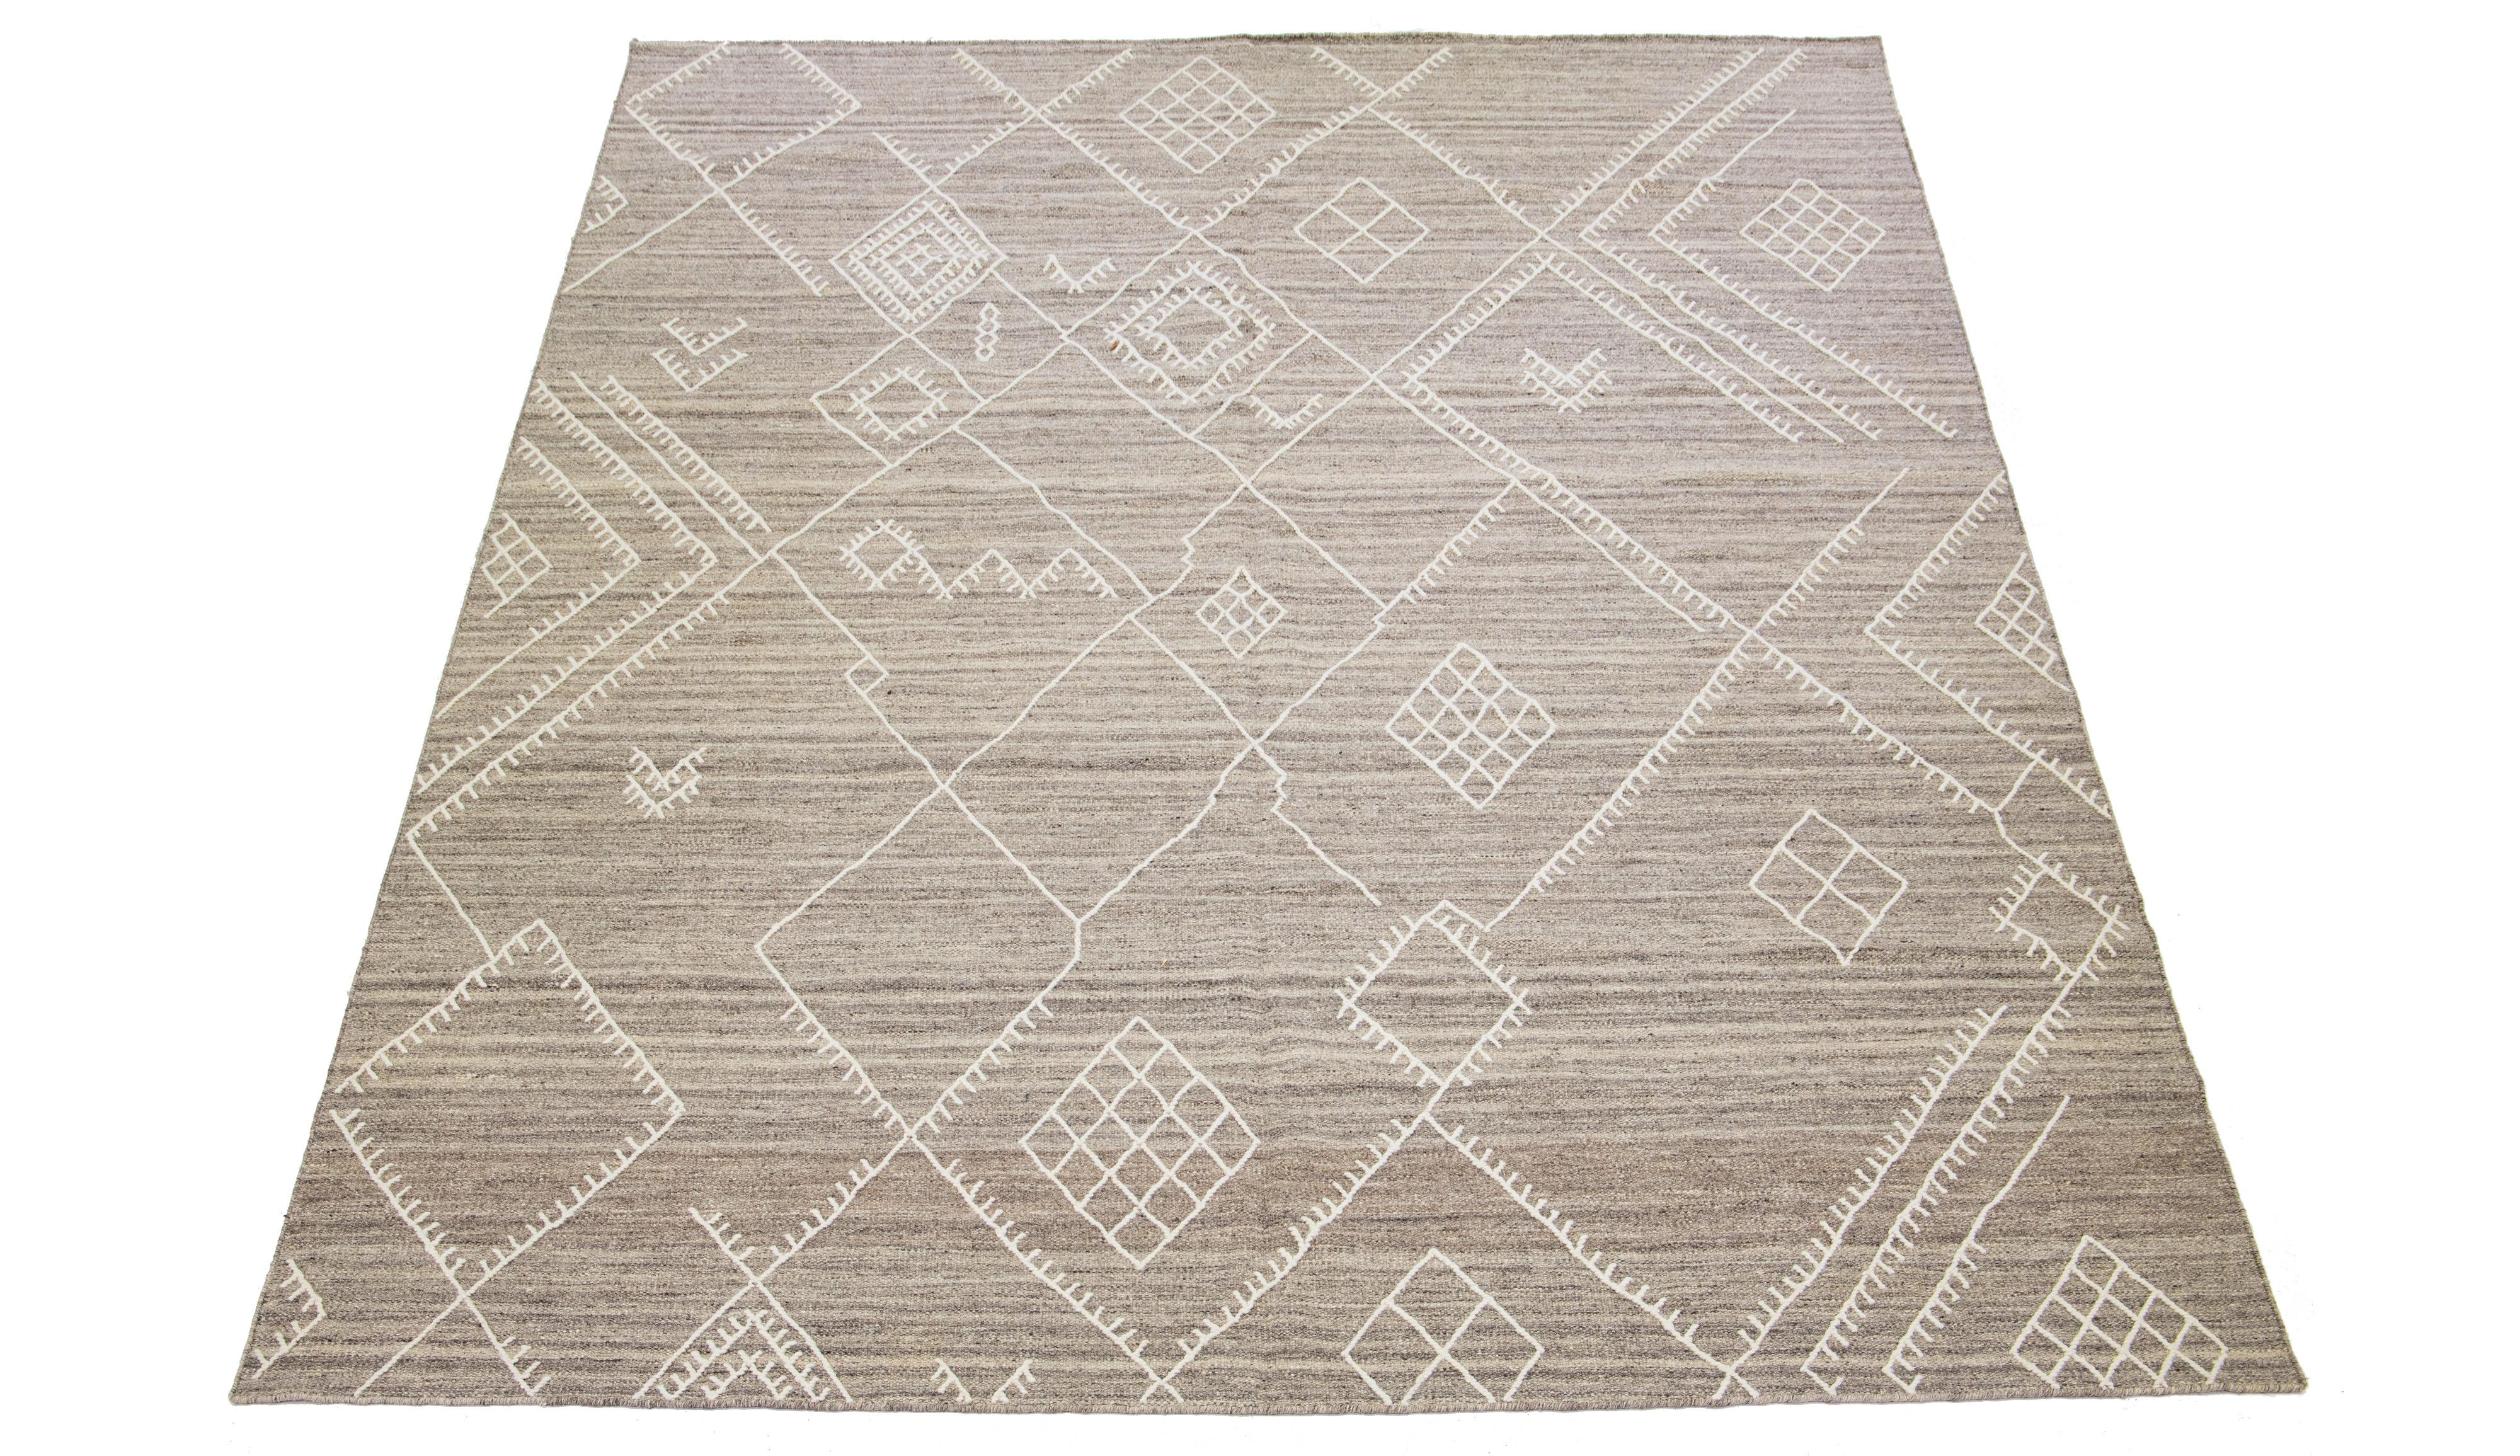 Beautiful kilim handmade wool rug with a gray field. This custom modern flatweave rug part of our Nantucket collection has ivory accents and features a gorgeous all-over geometric coastal design.

This rug measures: 10' x 14'.

Our rugs are